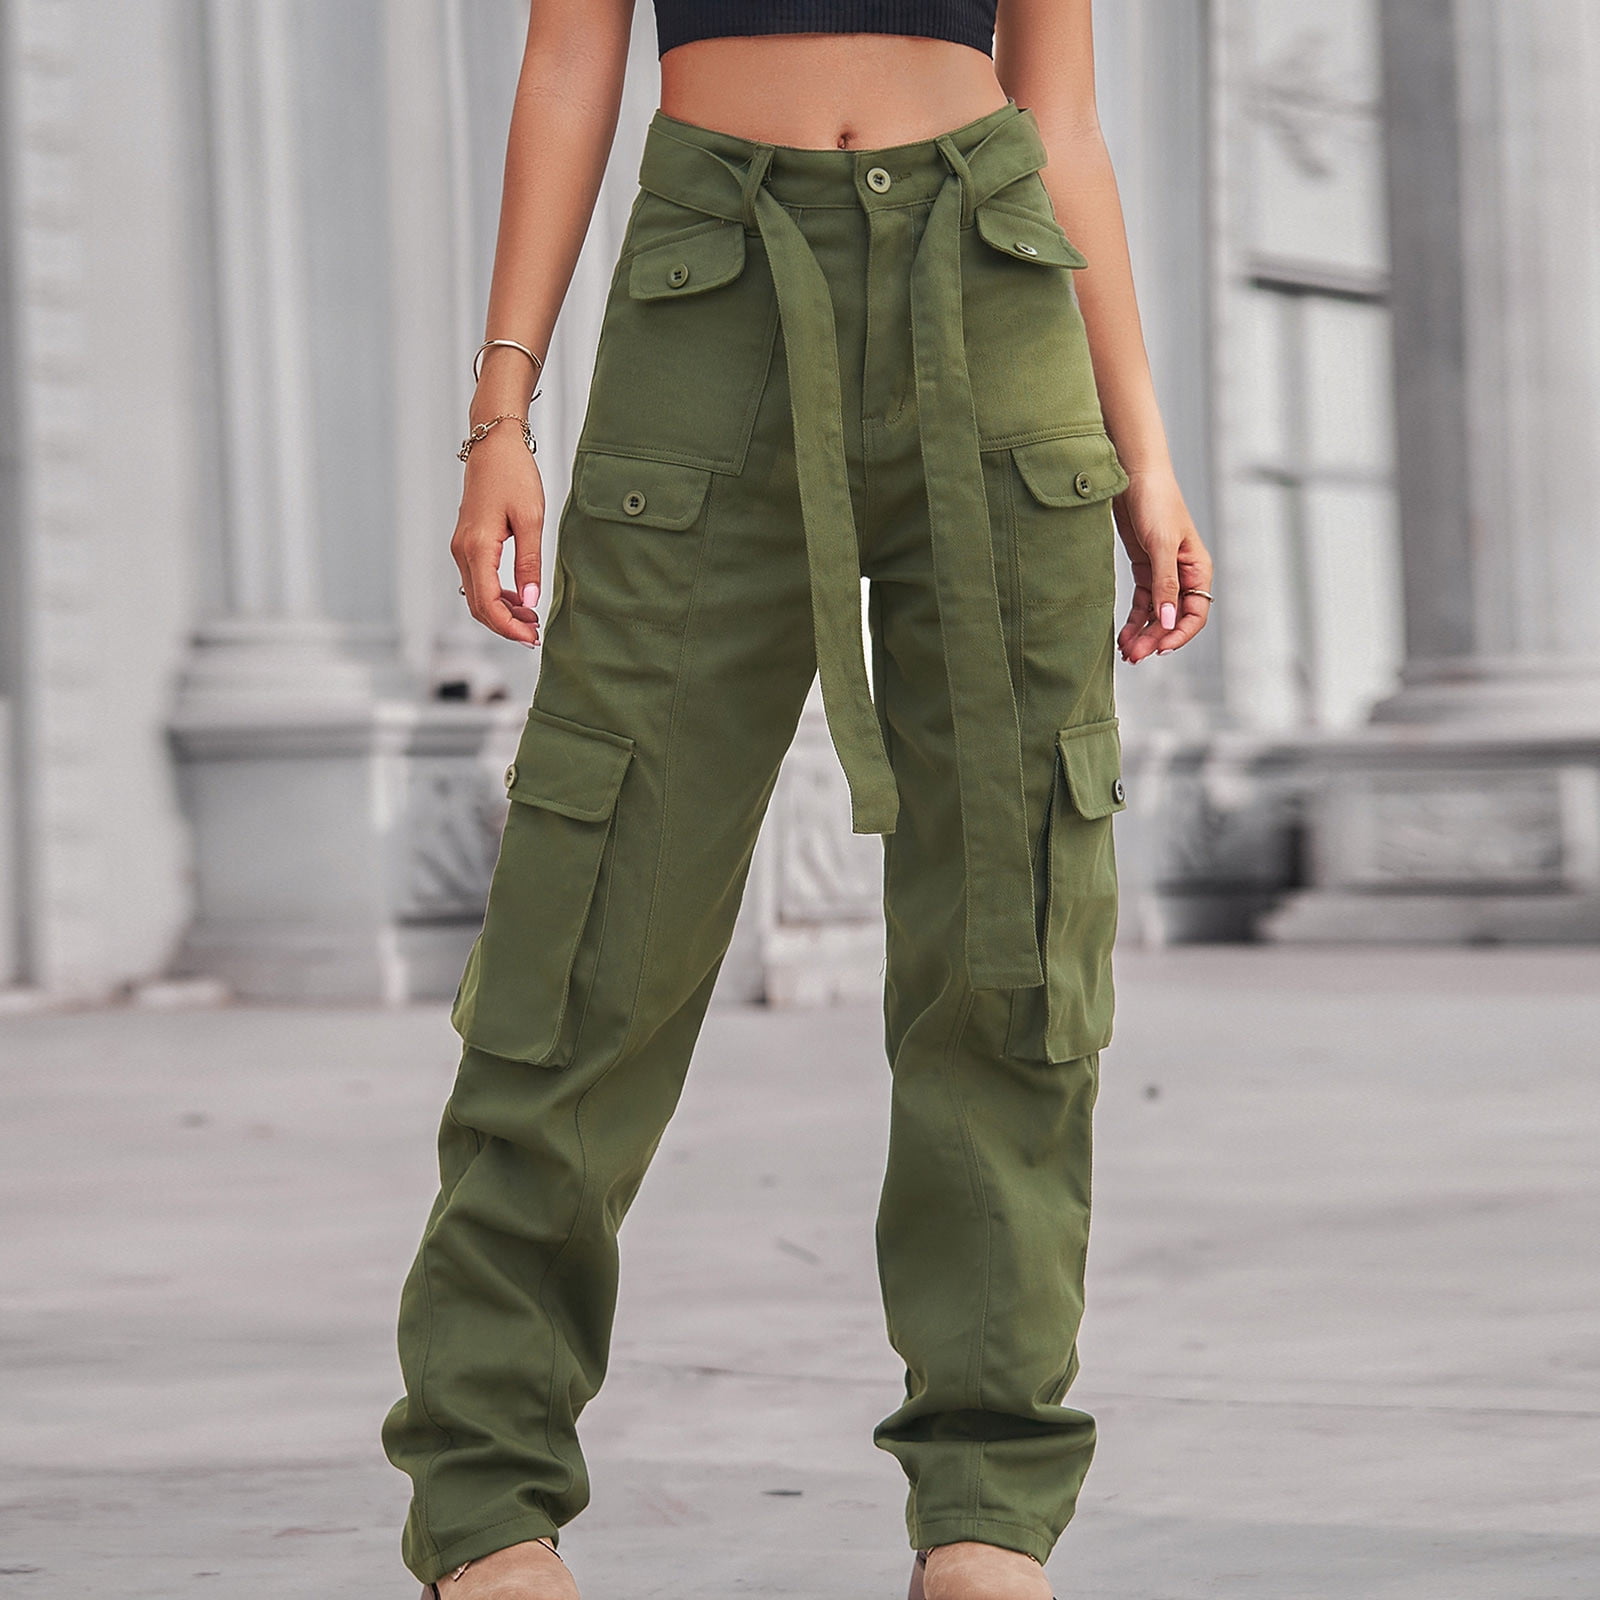 SELONE Cargo Pants Women Plus Size With Pockets Denim Casual Long Pant  Straight Leg Solid Pants Hippie Punk Trousers Jogger Loose Overalls s for